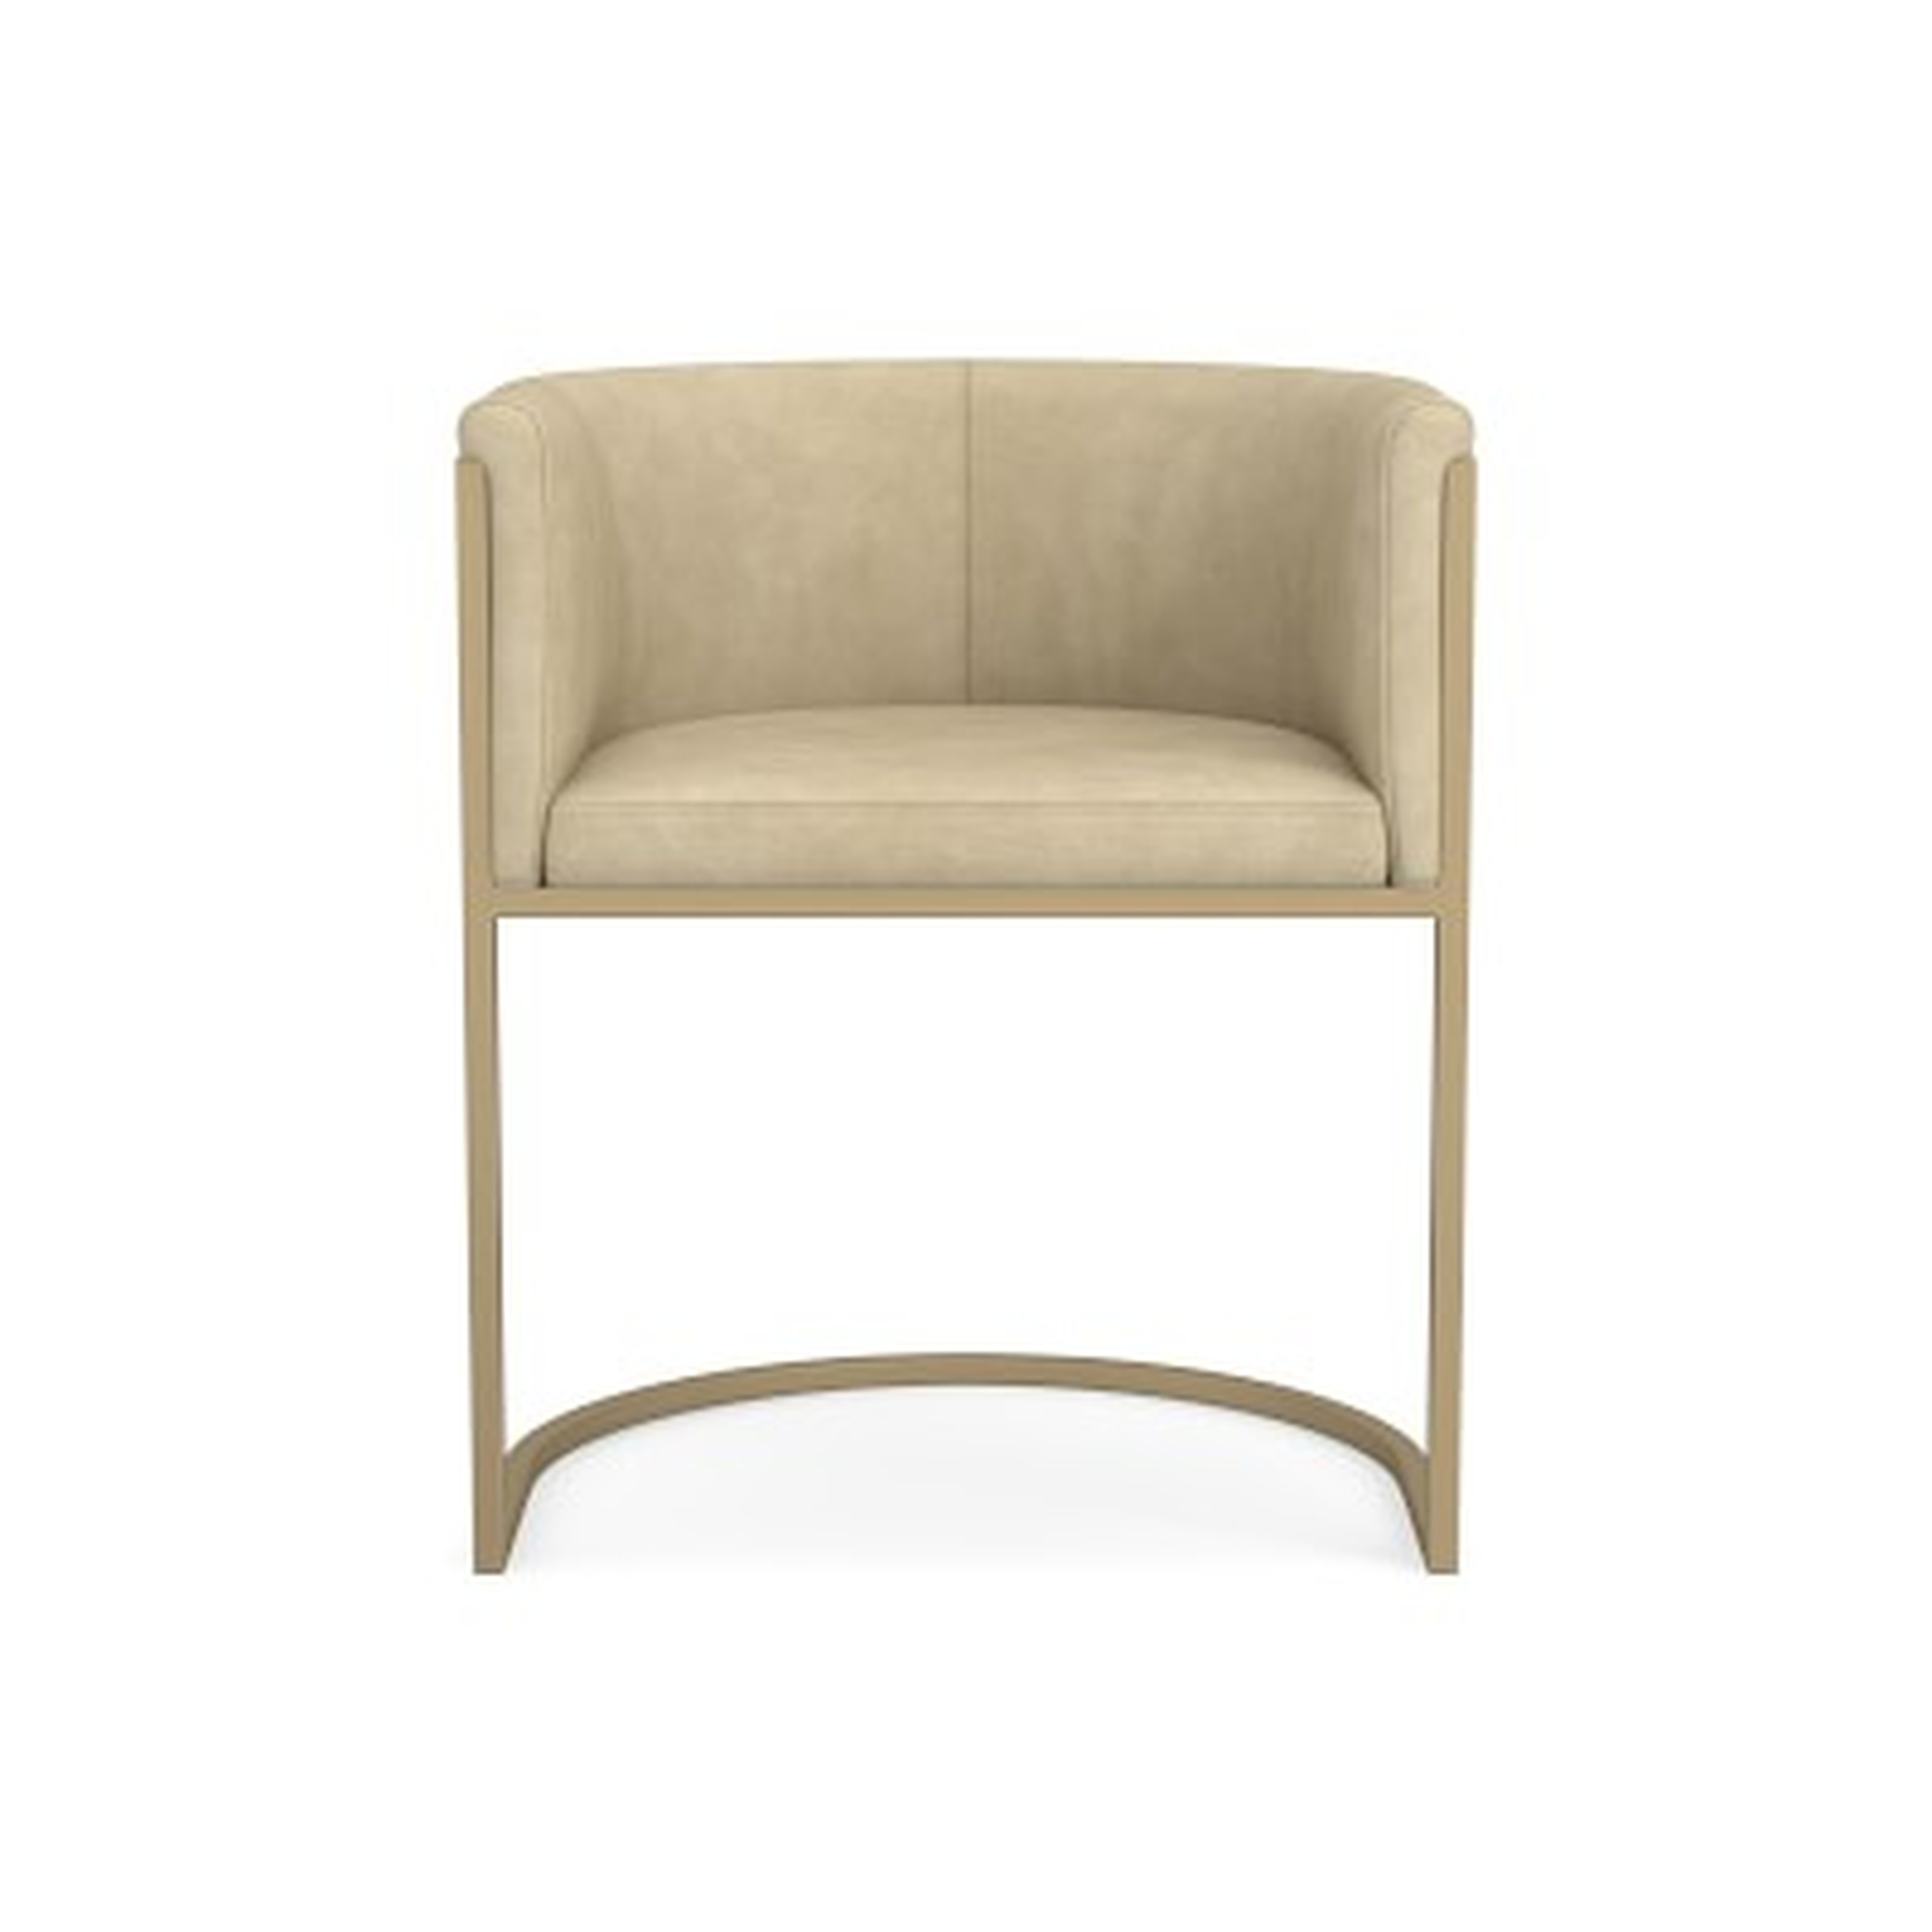 Remi Dining Armchair, Africa Leather, Beige, Antique Brass - Williams Sonoma